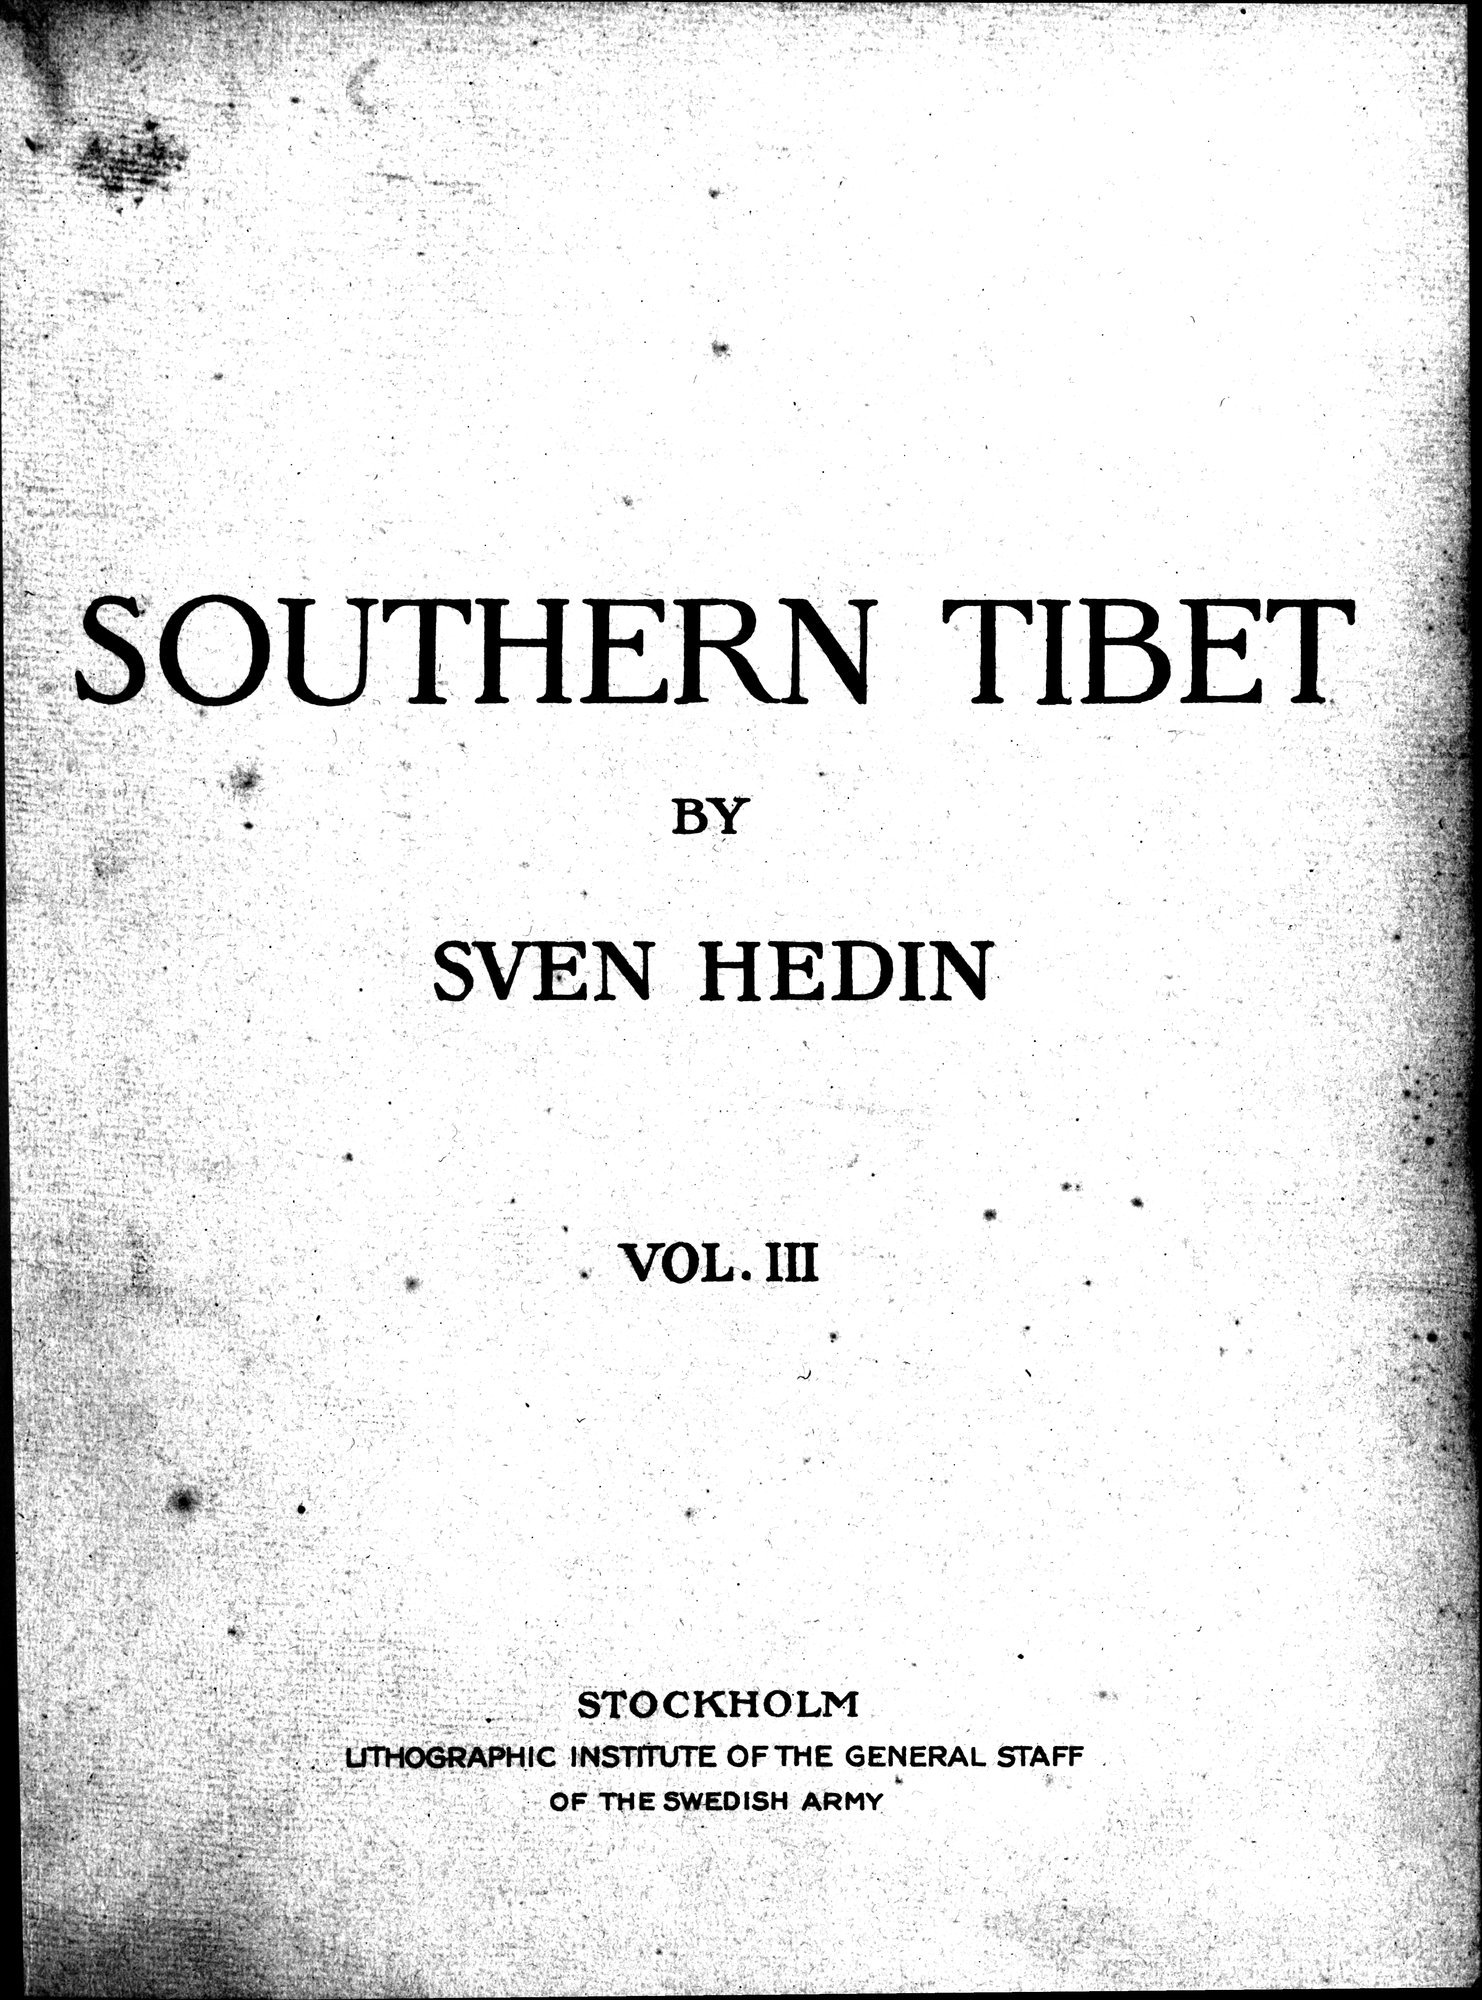 Southern Tibet : vol.3 / Page 7 (Grayscale High Resolution Image)